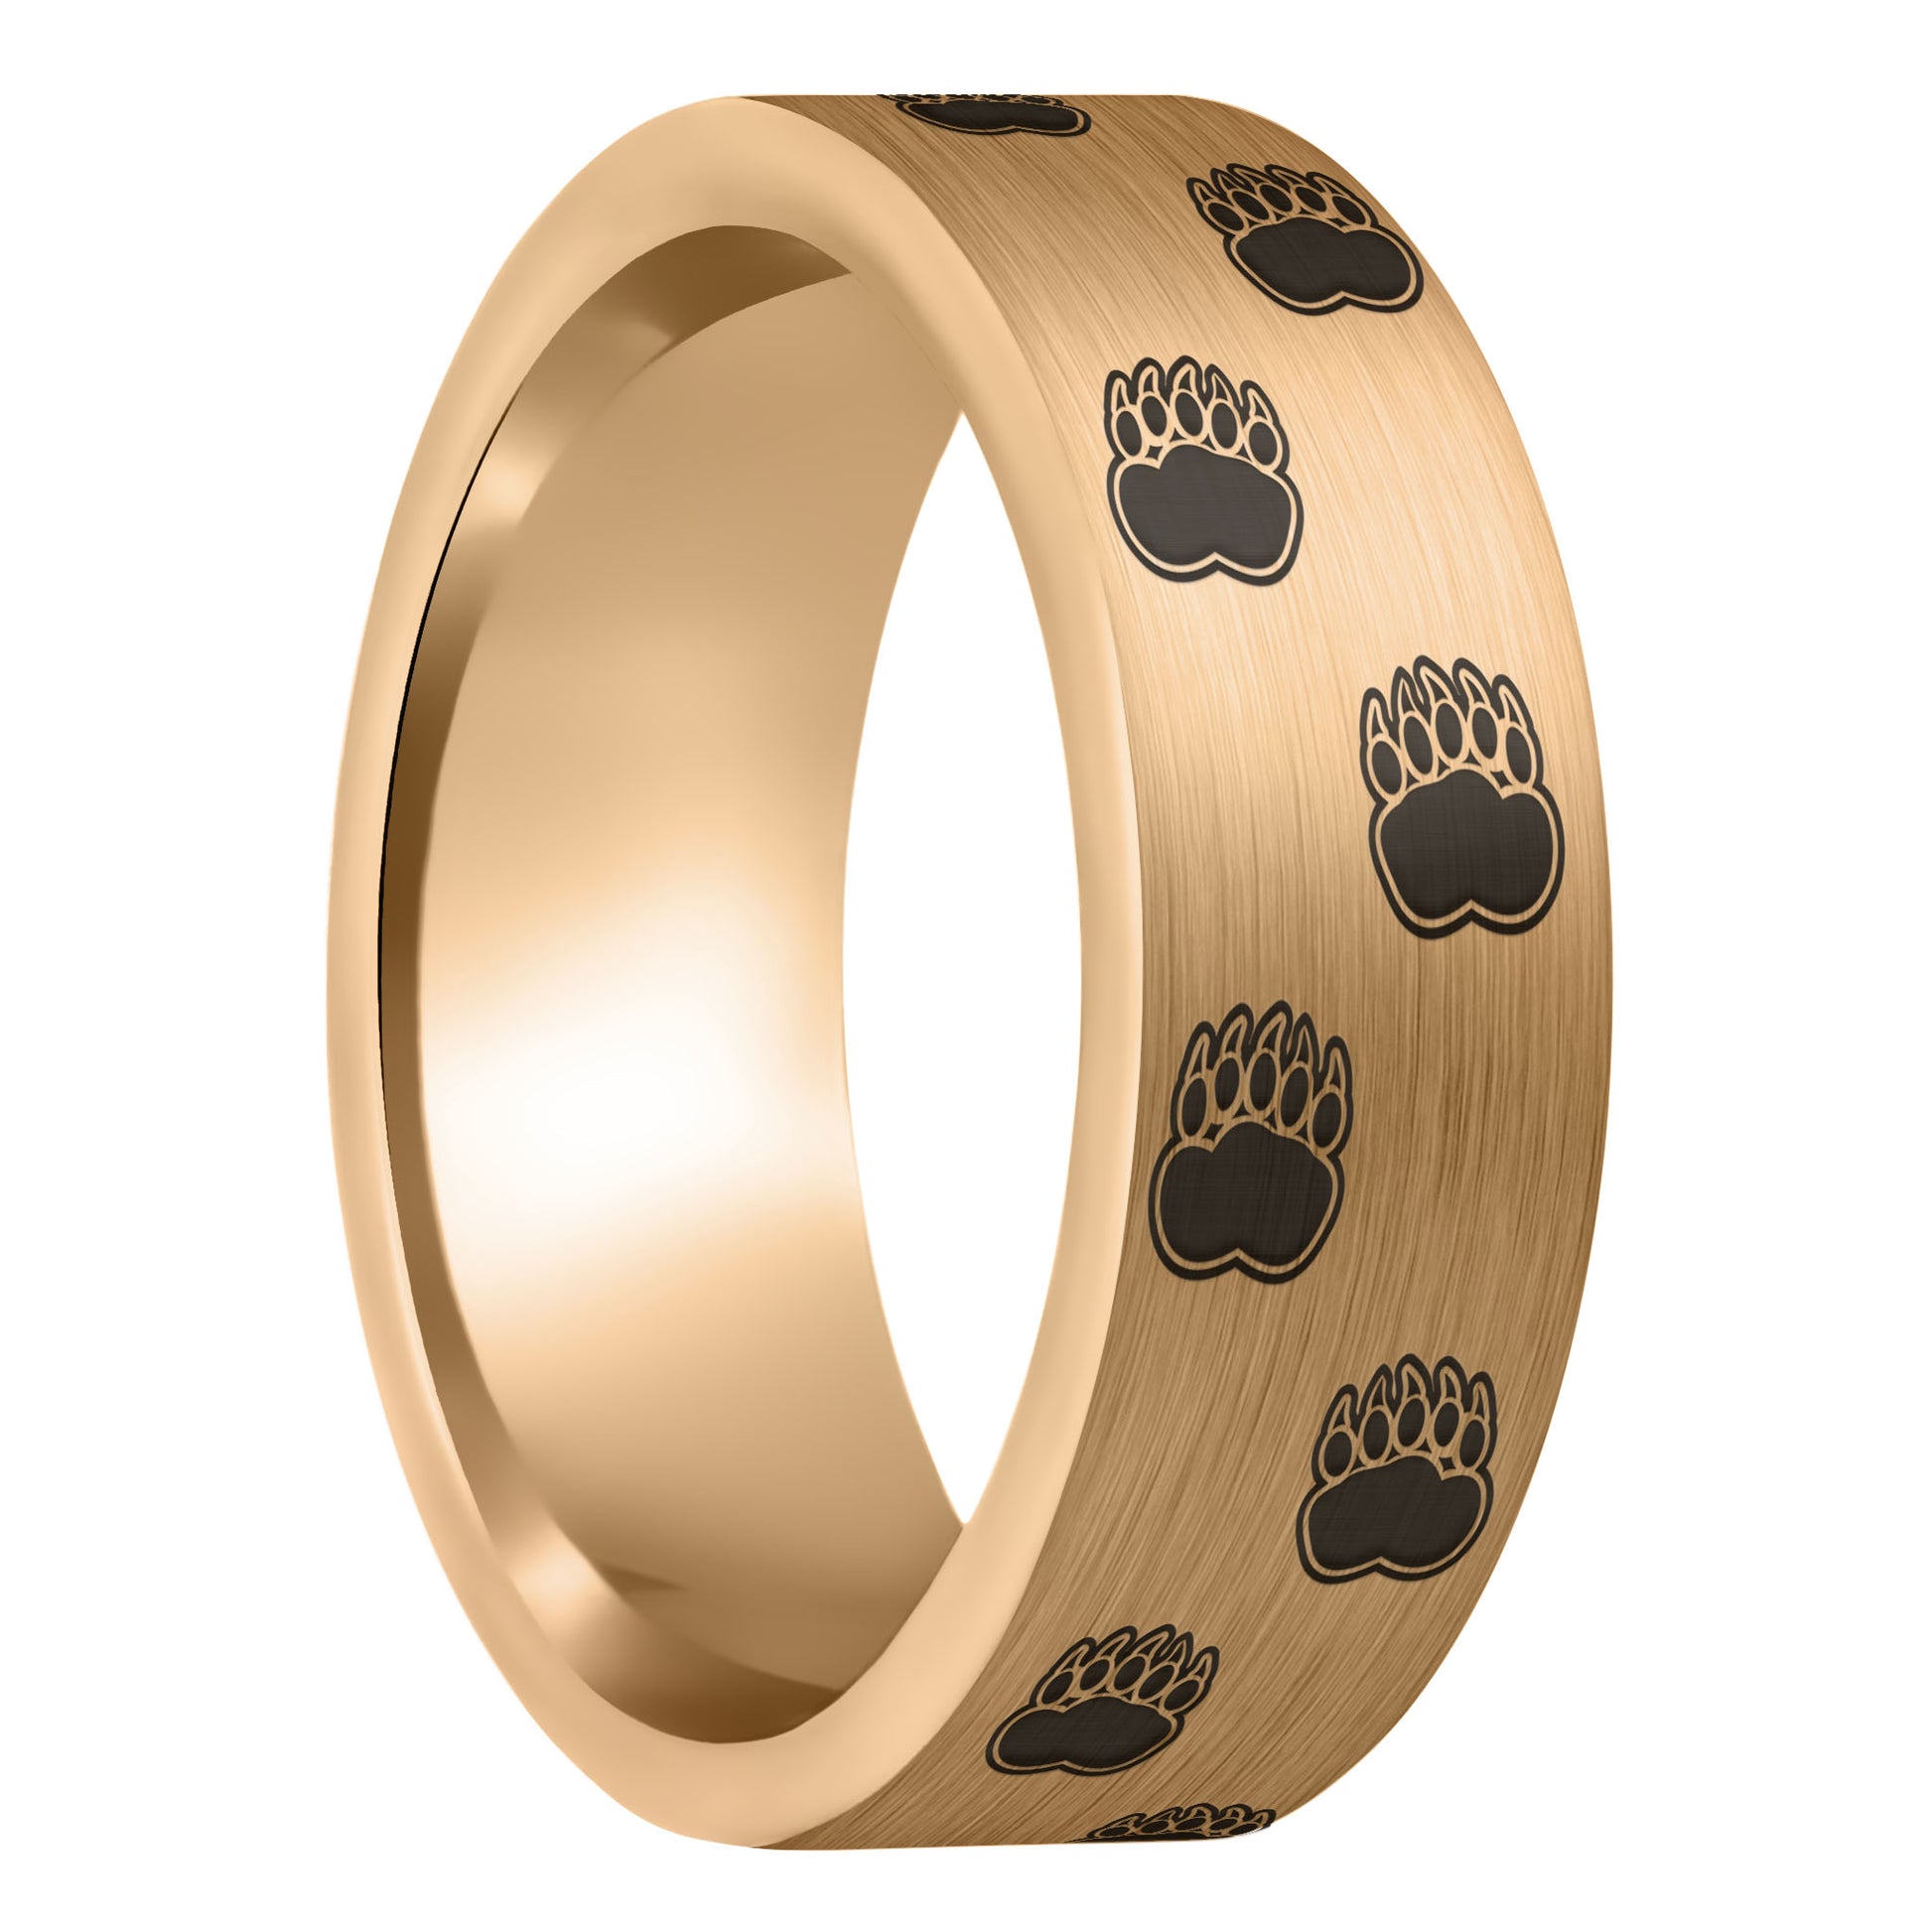 A bear paw print brushed rose gold tungsten men's wedding band displayed on a plain white background.